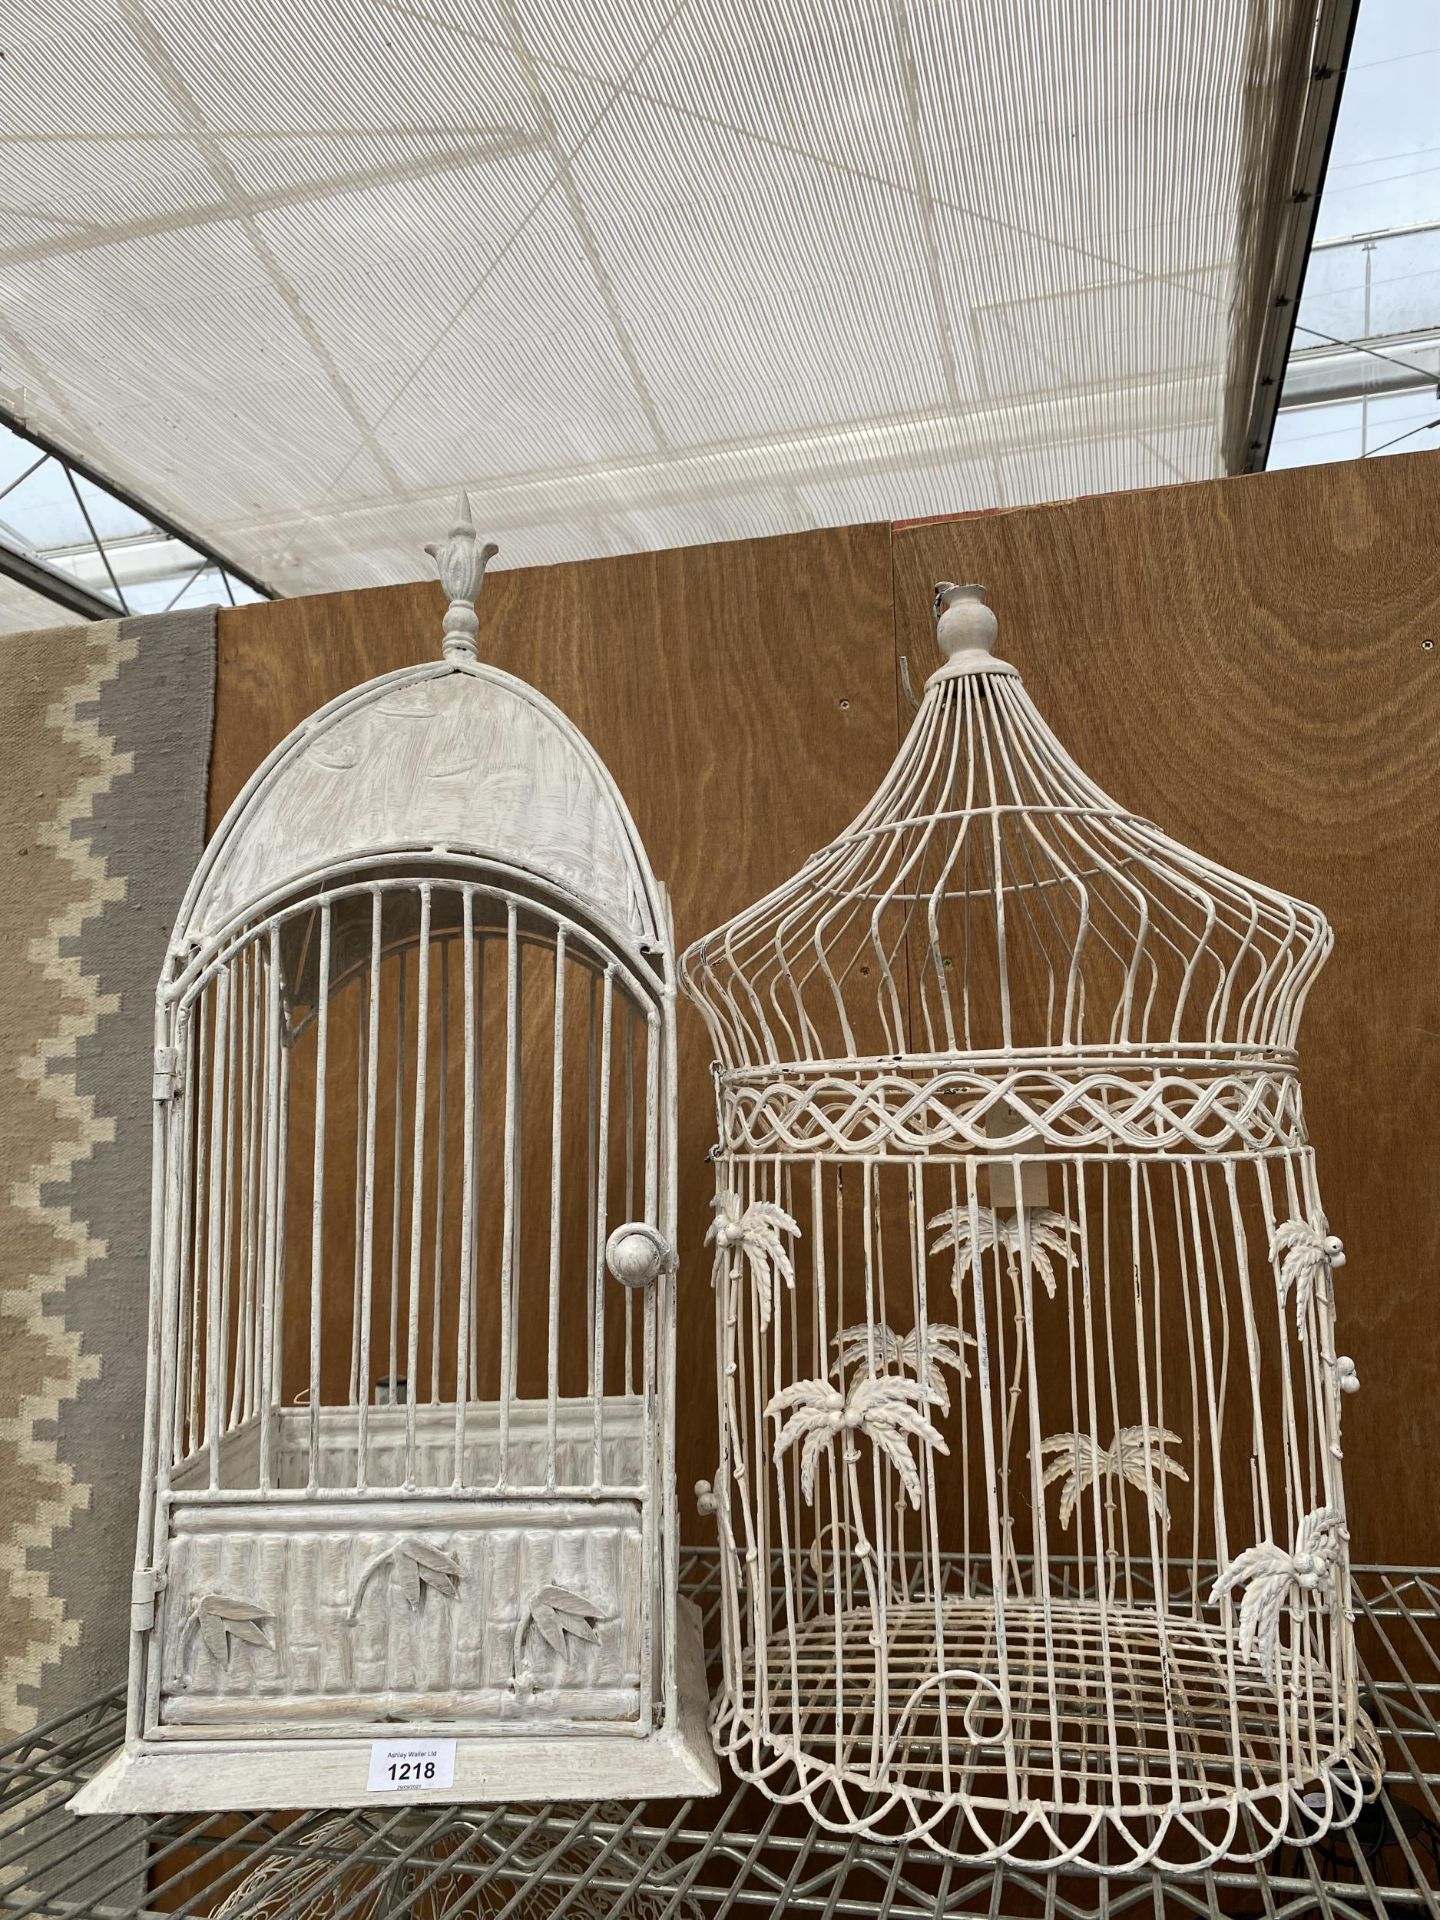 TWO DECORATIVE METAL BIRD CAGES